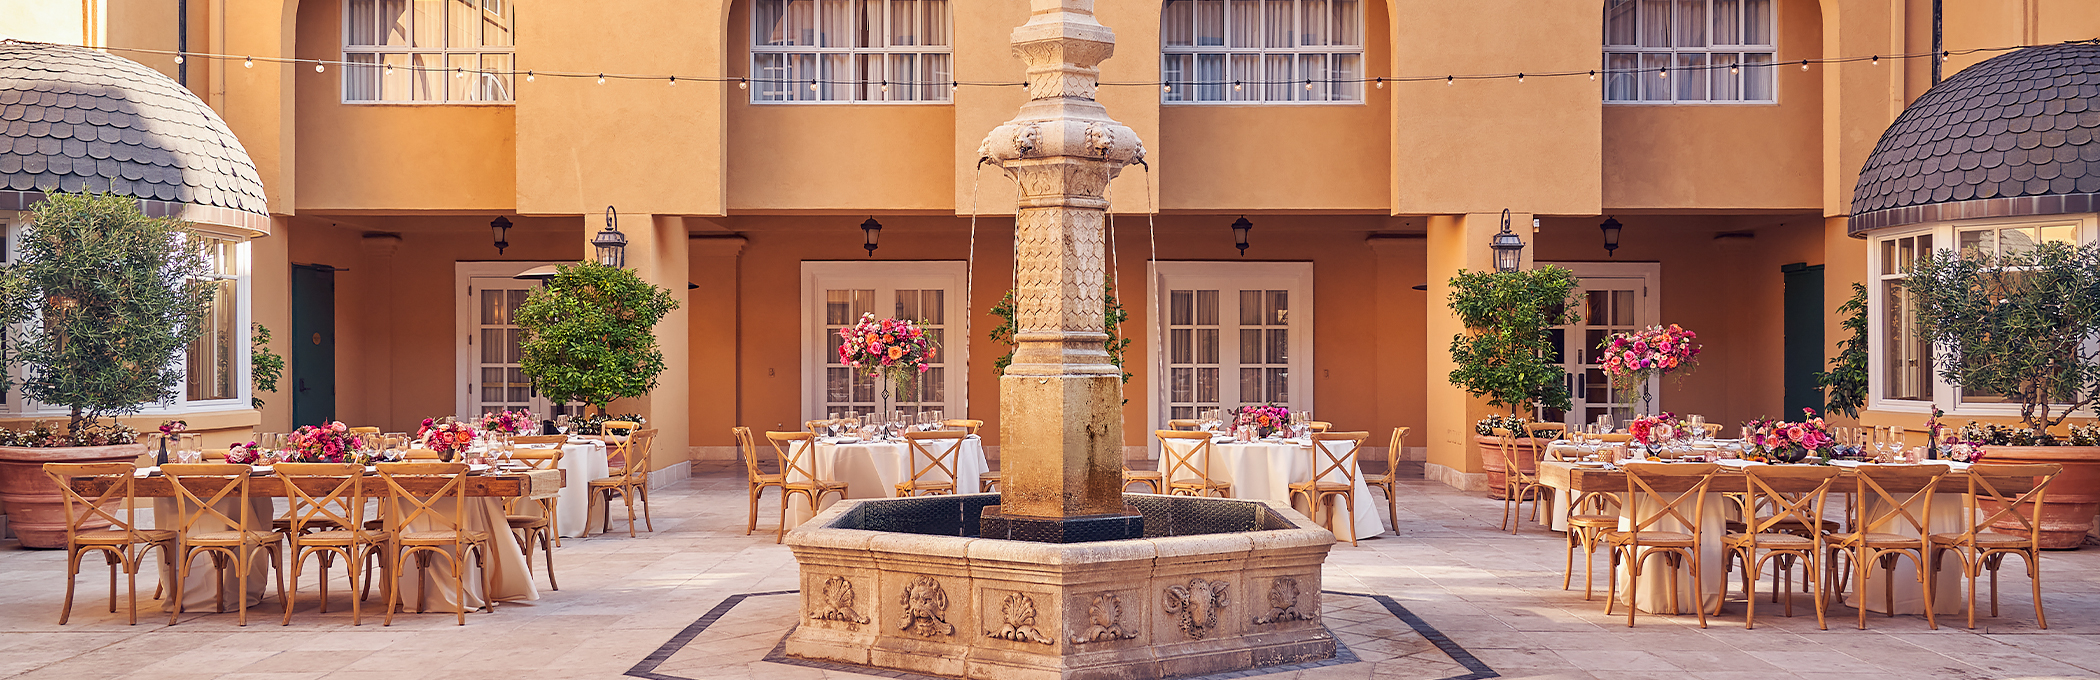 courtyard wedding with tables and chairs and fountain